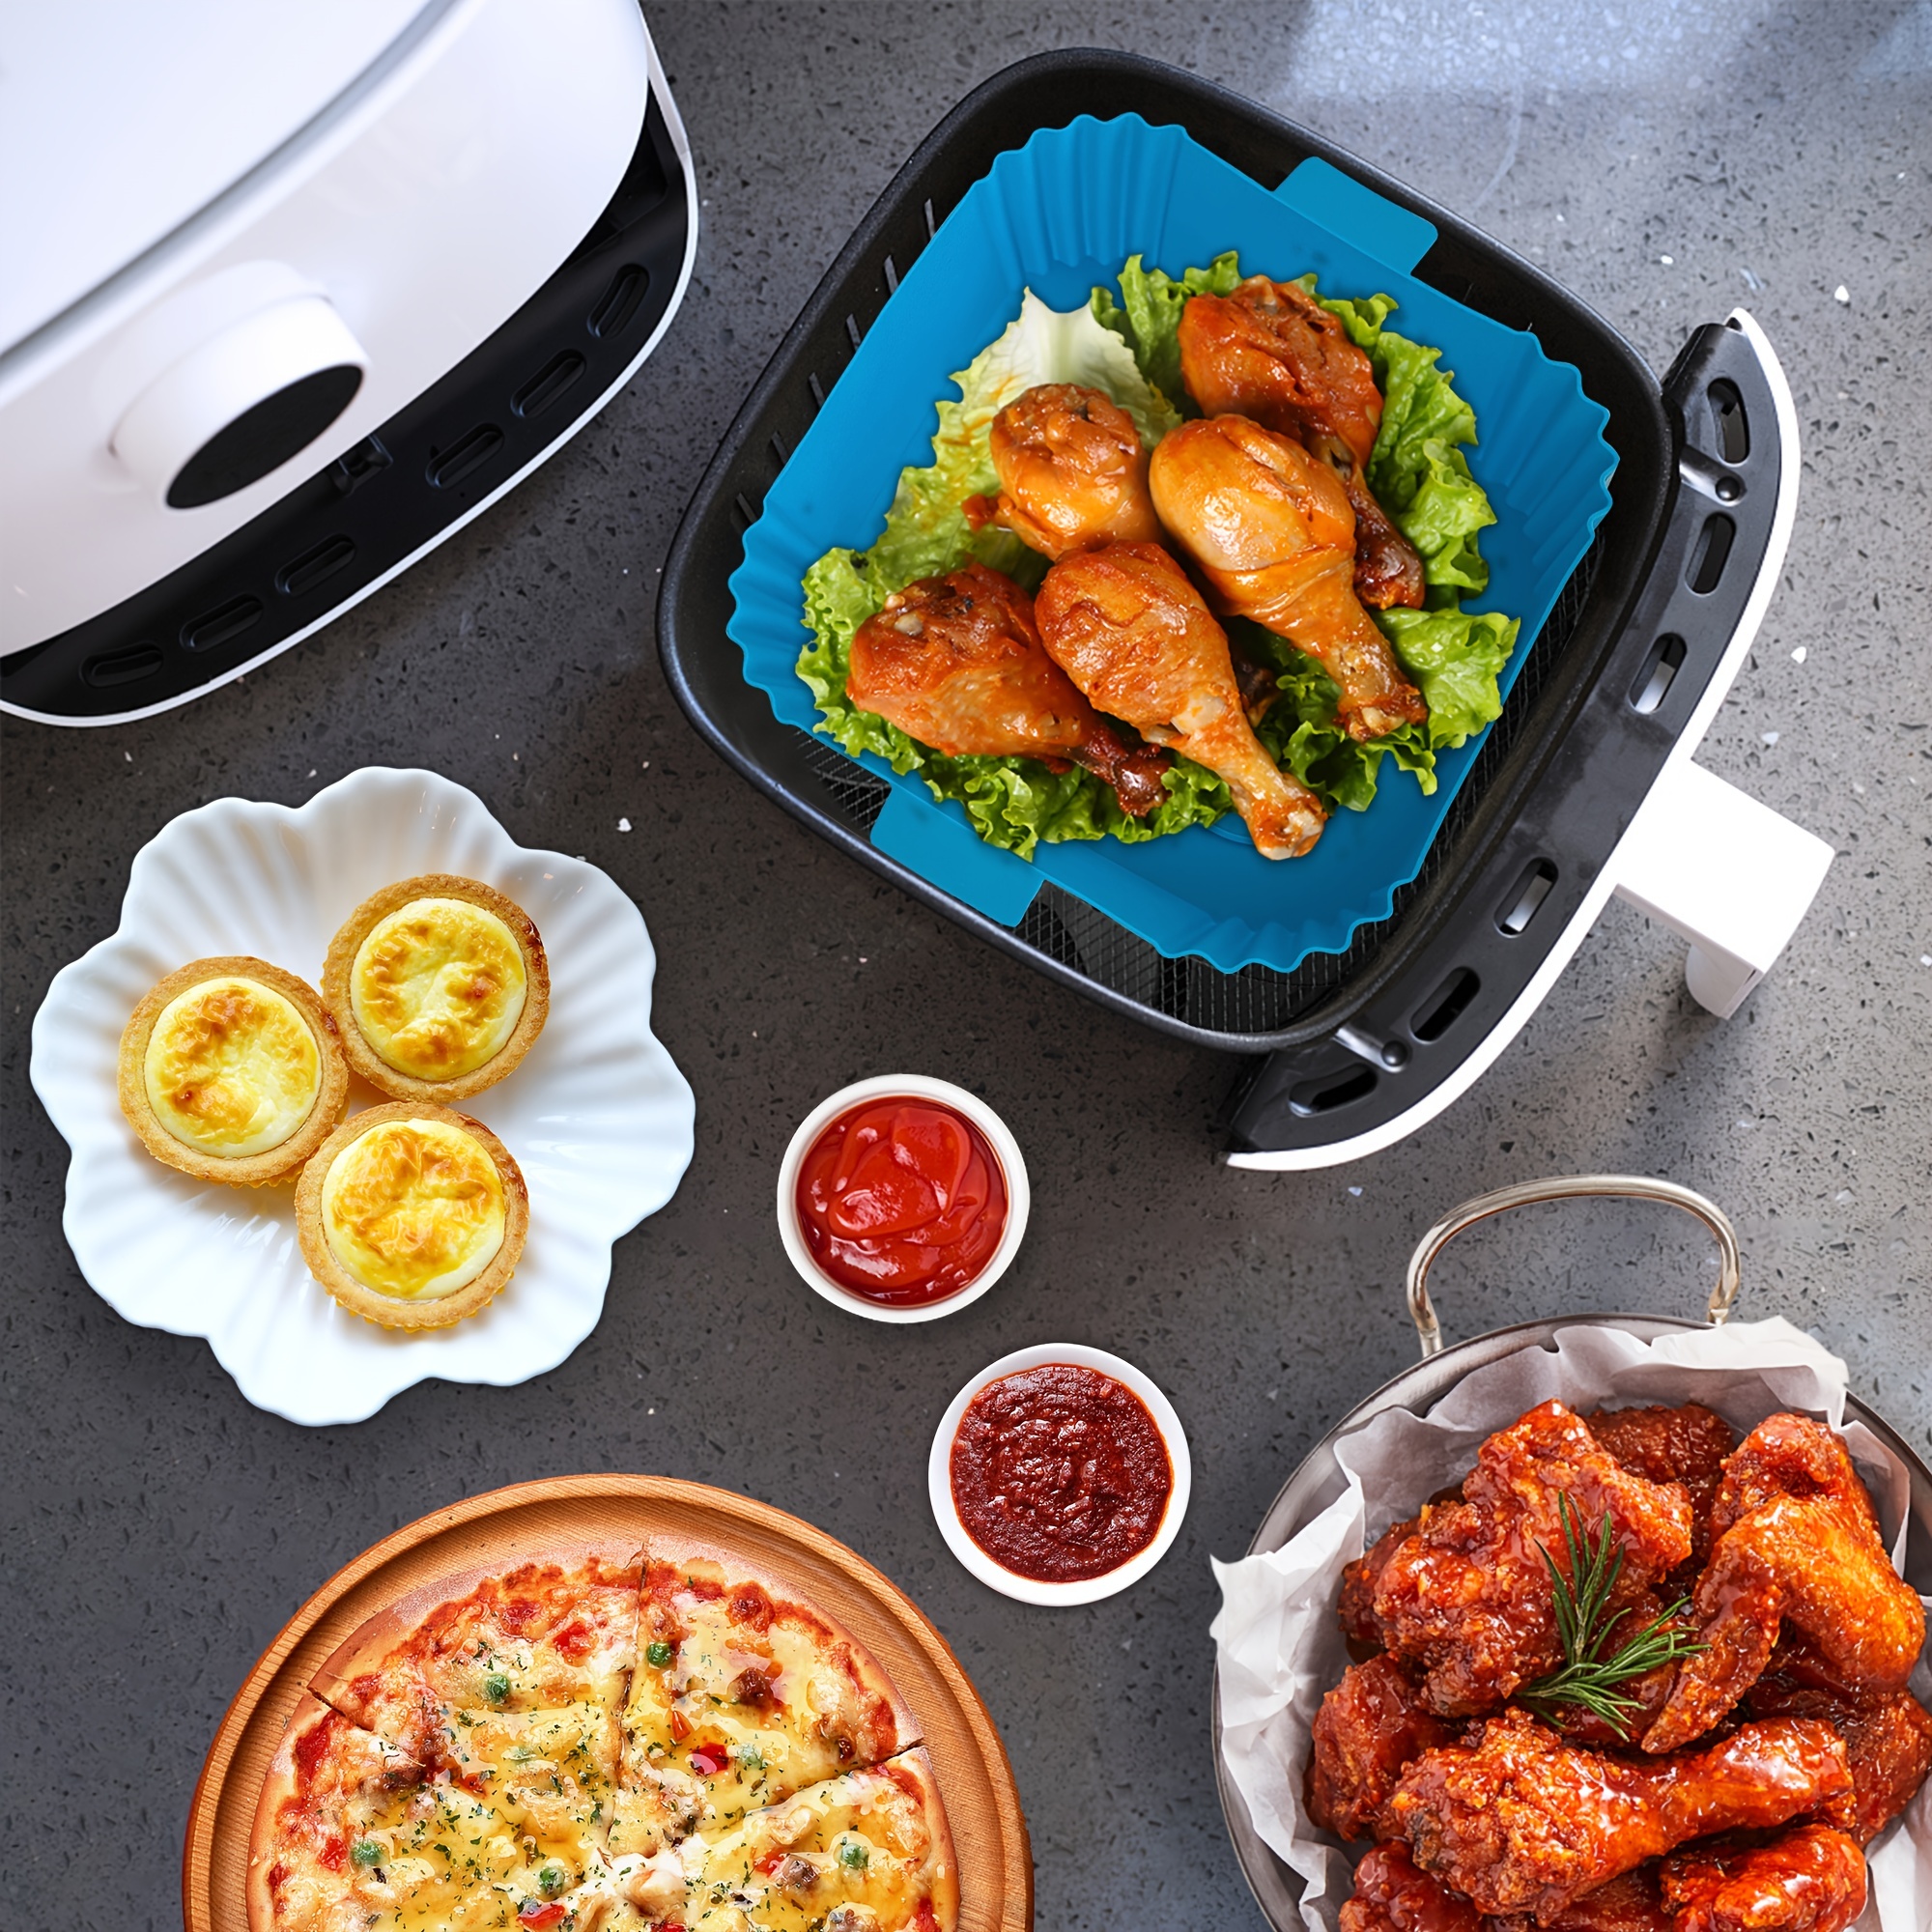 Air Fryer Silicone Pan Accessory – No Discoloration, Easy Clean, 8 Inch Food Safe Reusable Air Fryer Basket, Free Shipping